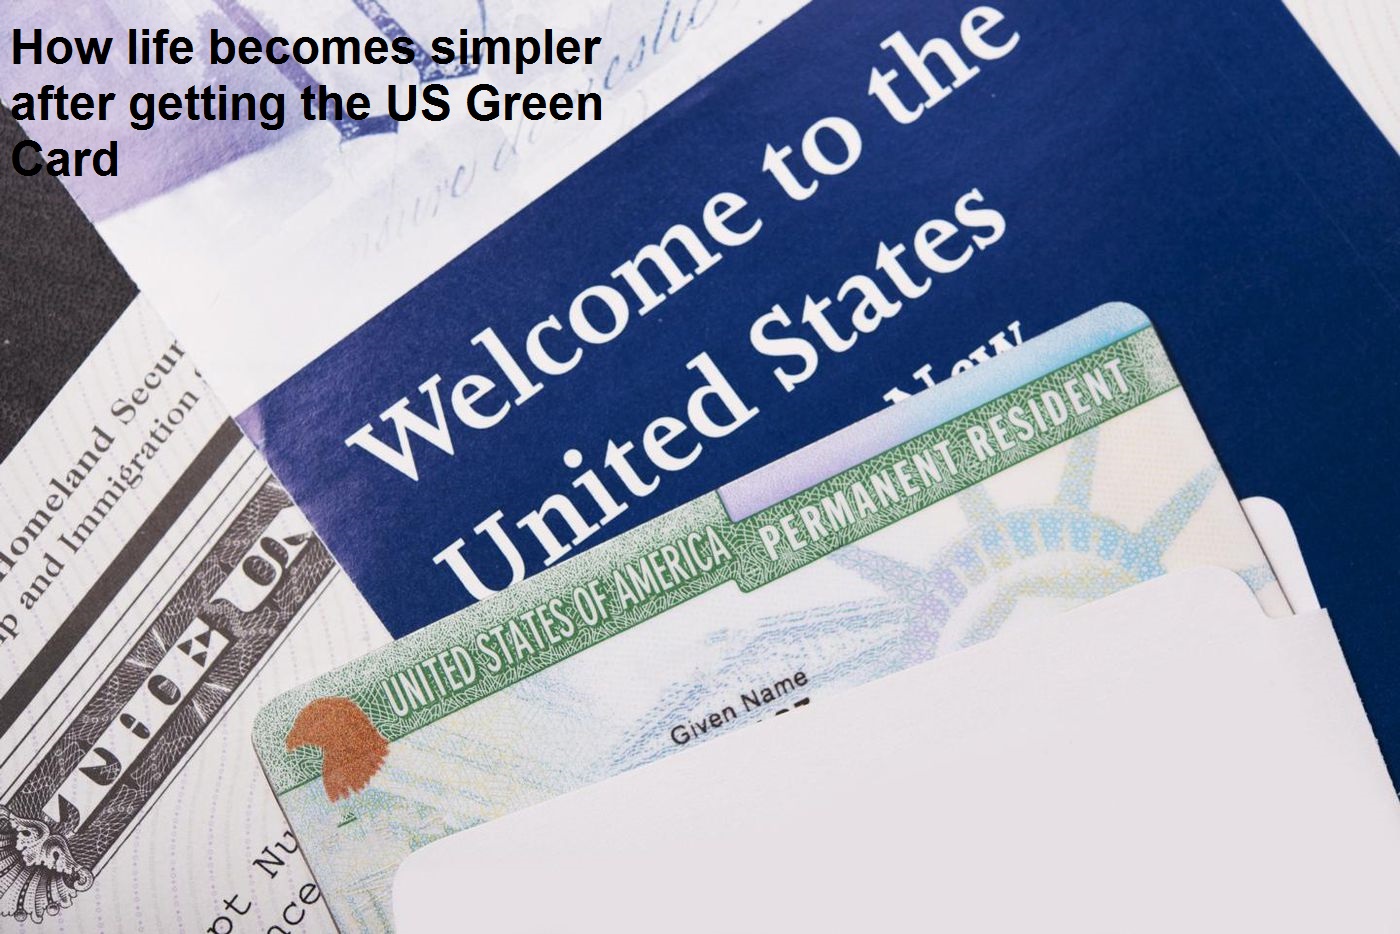 How life becomes simpler after getting the US Green Card